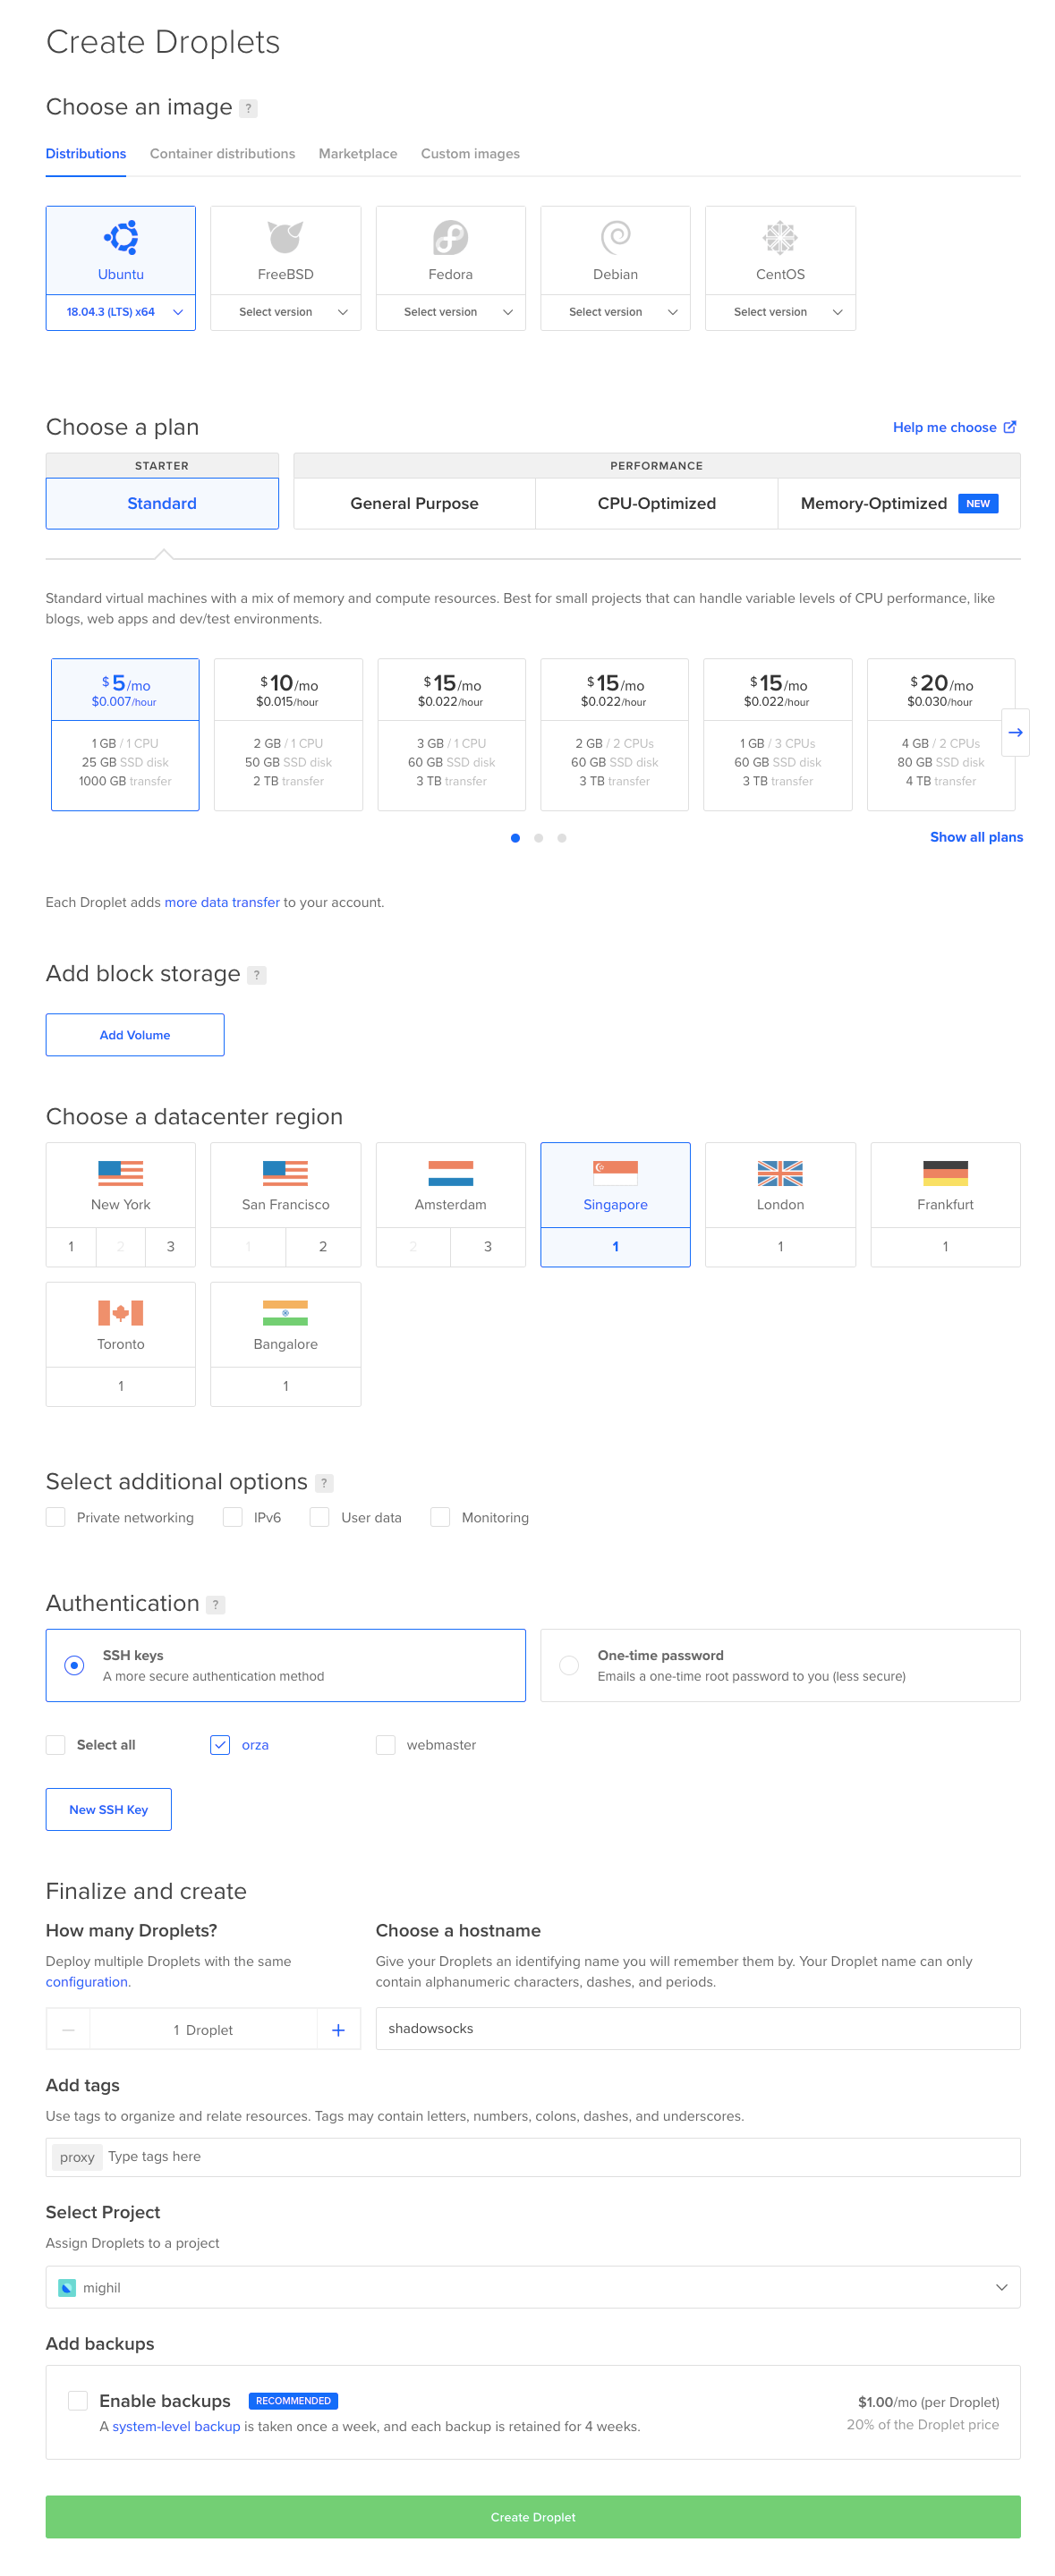 Screenshot showing the creation of a droplet on DigitalOcean.com